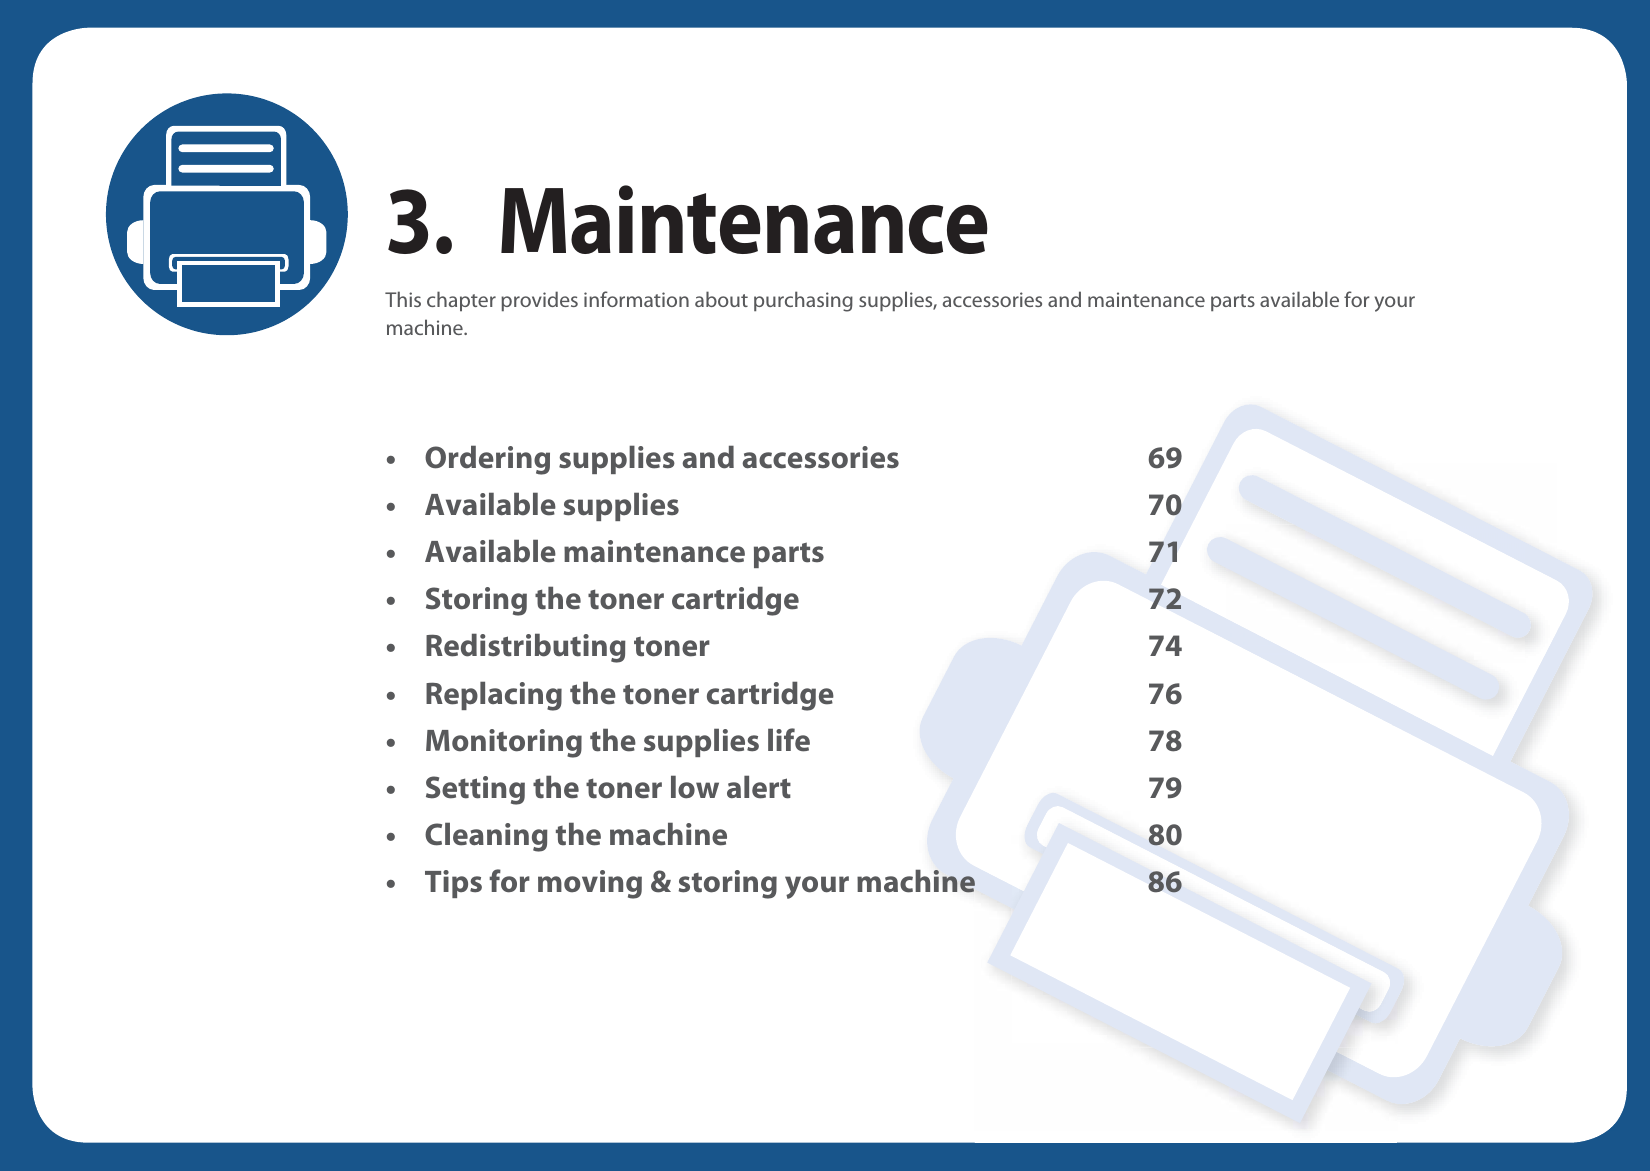 3. MaintenanceThis chapter provides information about purchasing supplies, accessories and maintenance parts available for your machine.• Ordering supplies and accessories 69• Available supplies 70• Available maintenance parts 71• Storing the toner cartridge 72• Redistributing toner 74• Replacing the toner cartridge 76• Monitoring the supplies life 78• Setting the toner low alert 79• Cleaning the machine 80• Tips for moving &amp; storing your machine 86